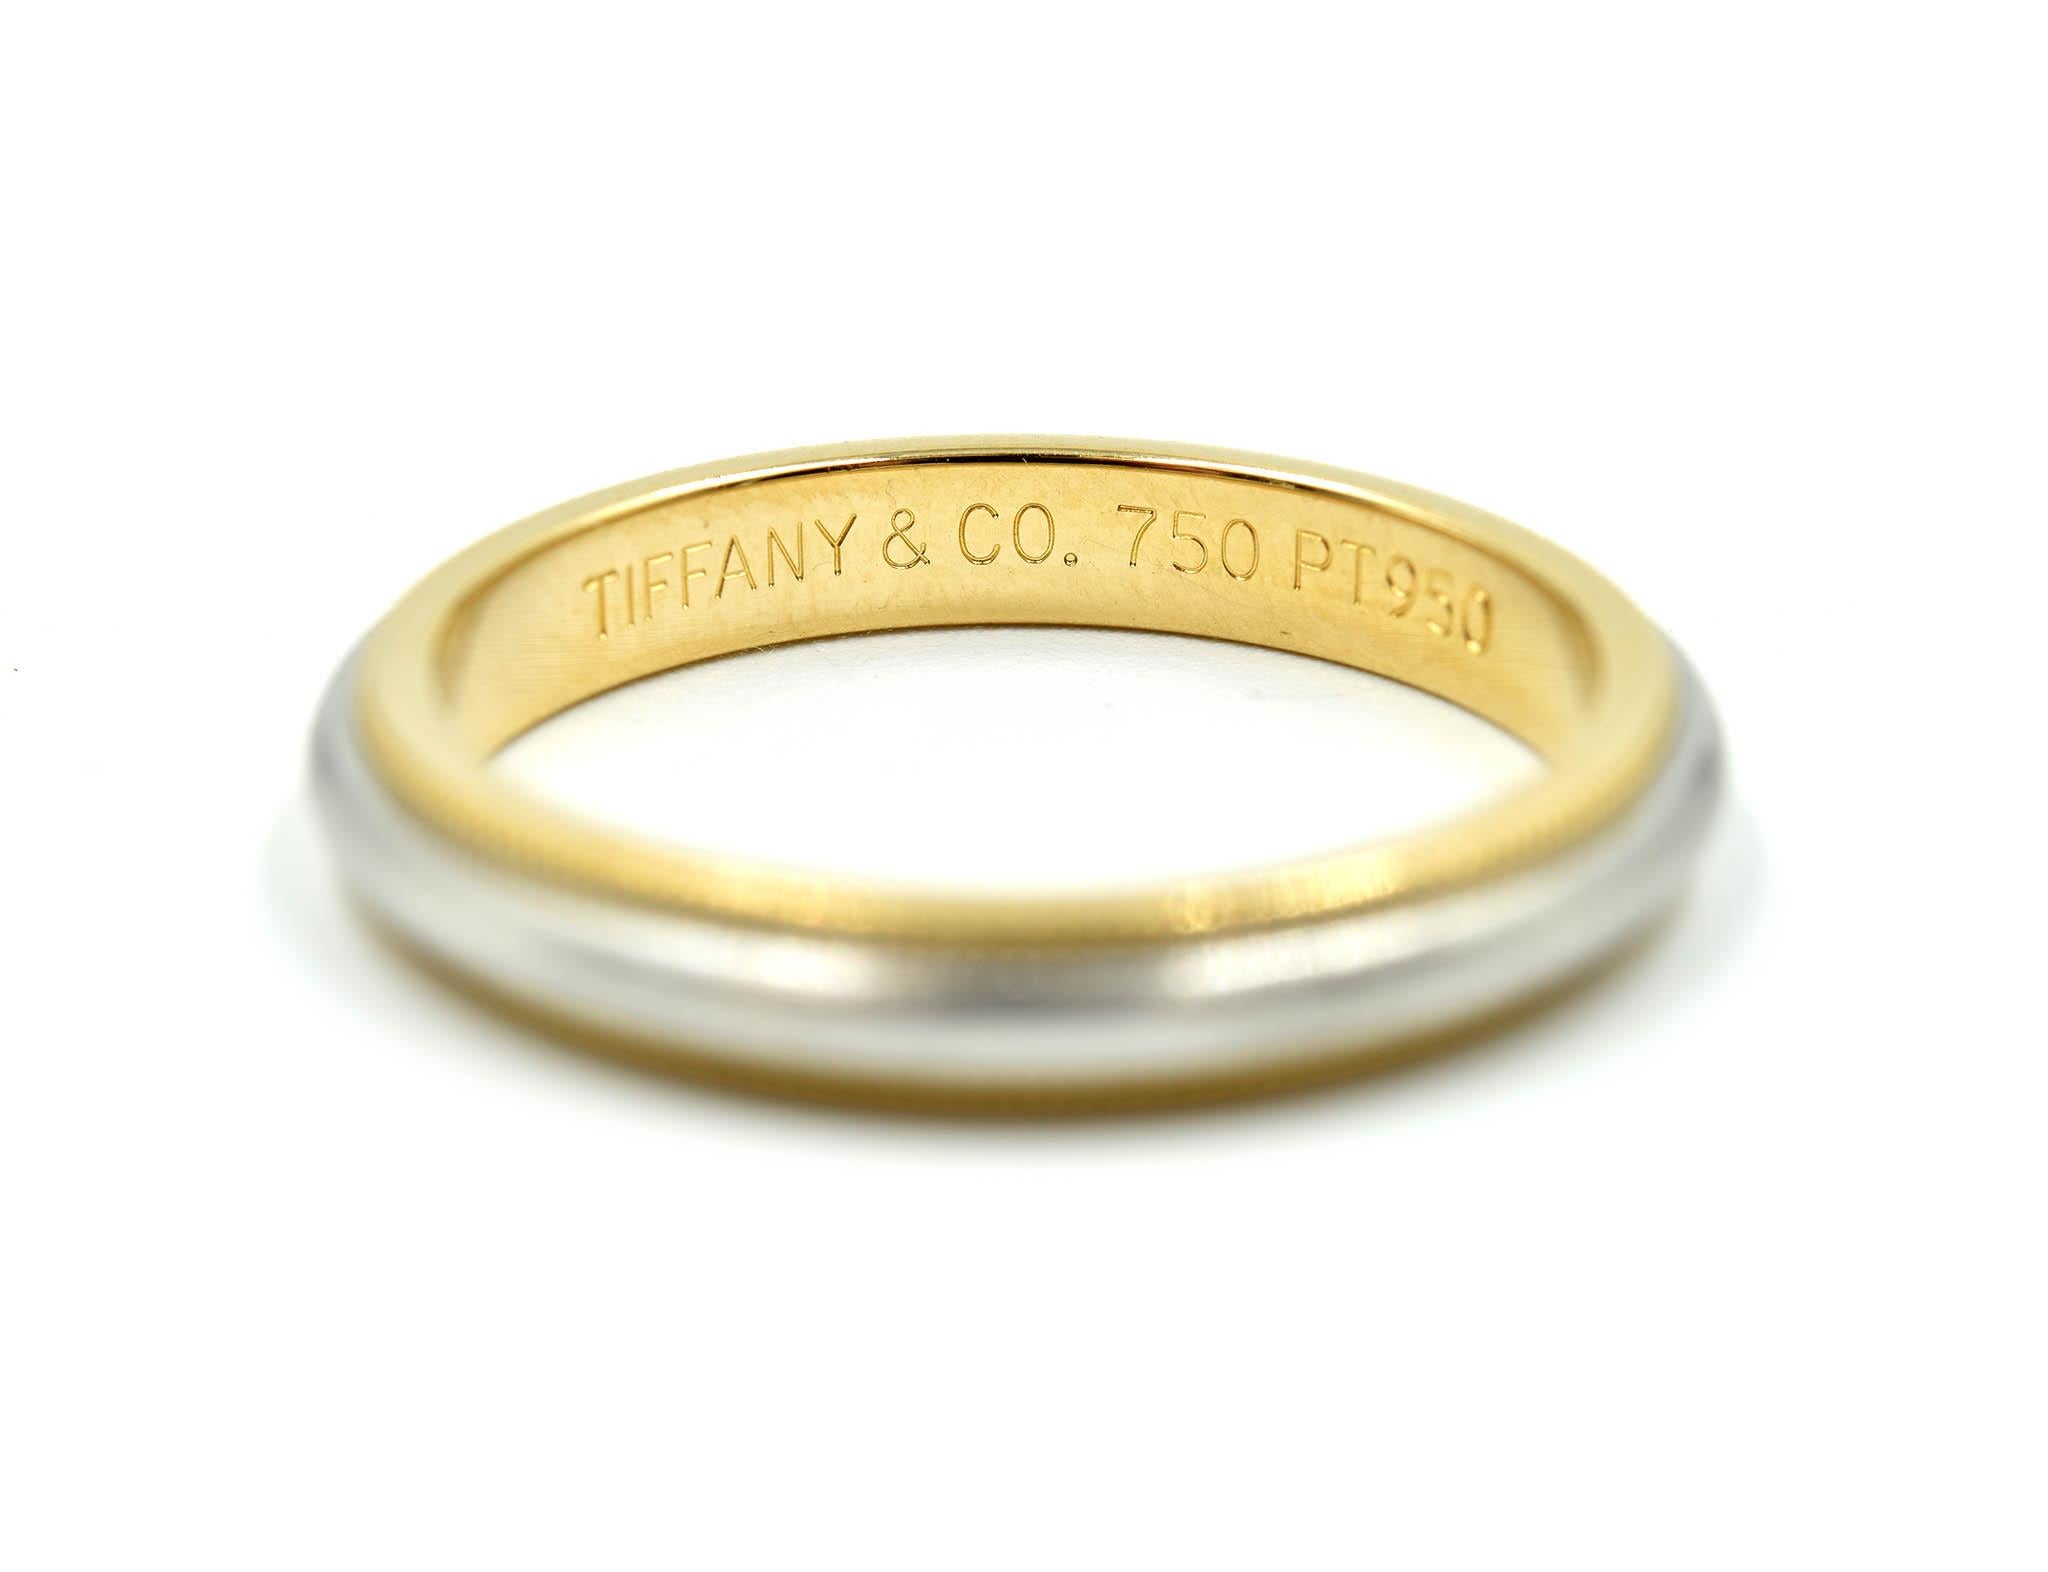 Designer: Tiffany & Co
Material: 18k yellow gold and platinum
Dimensions: 3.45mm wide
Ring Size: 9.50
Weight: 6.40 grams
